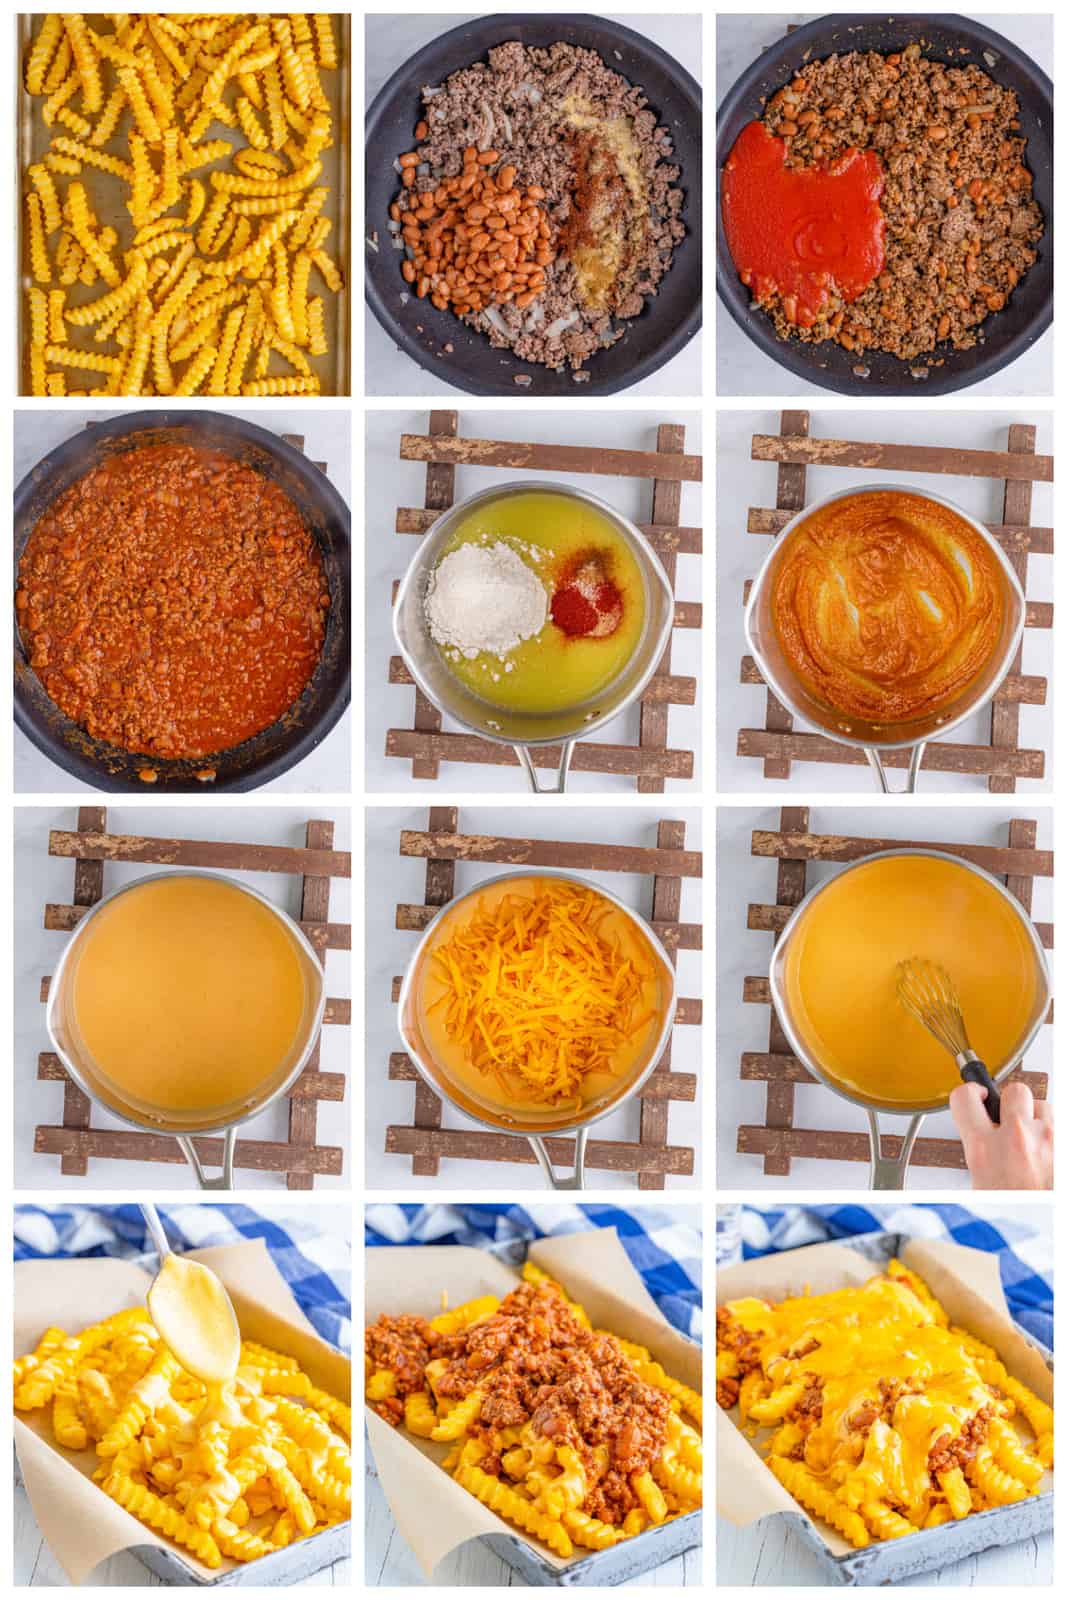 Step by step photos on how to make Chili Cheese Fries.